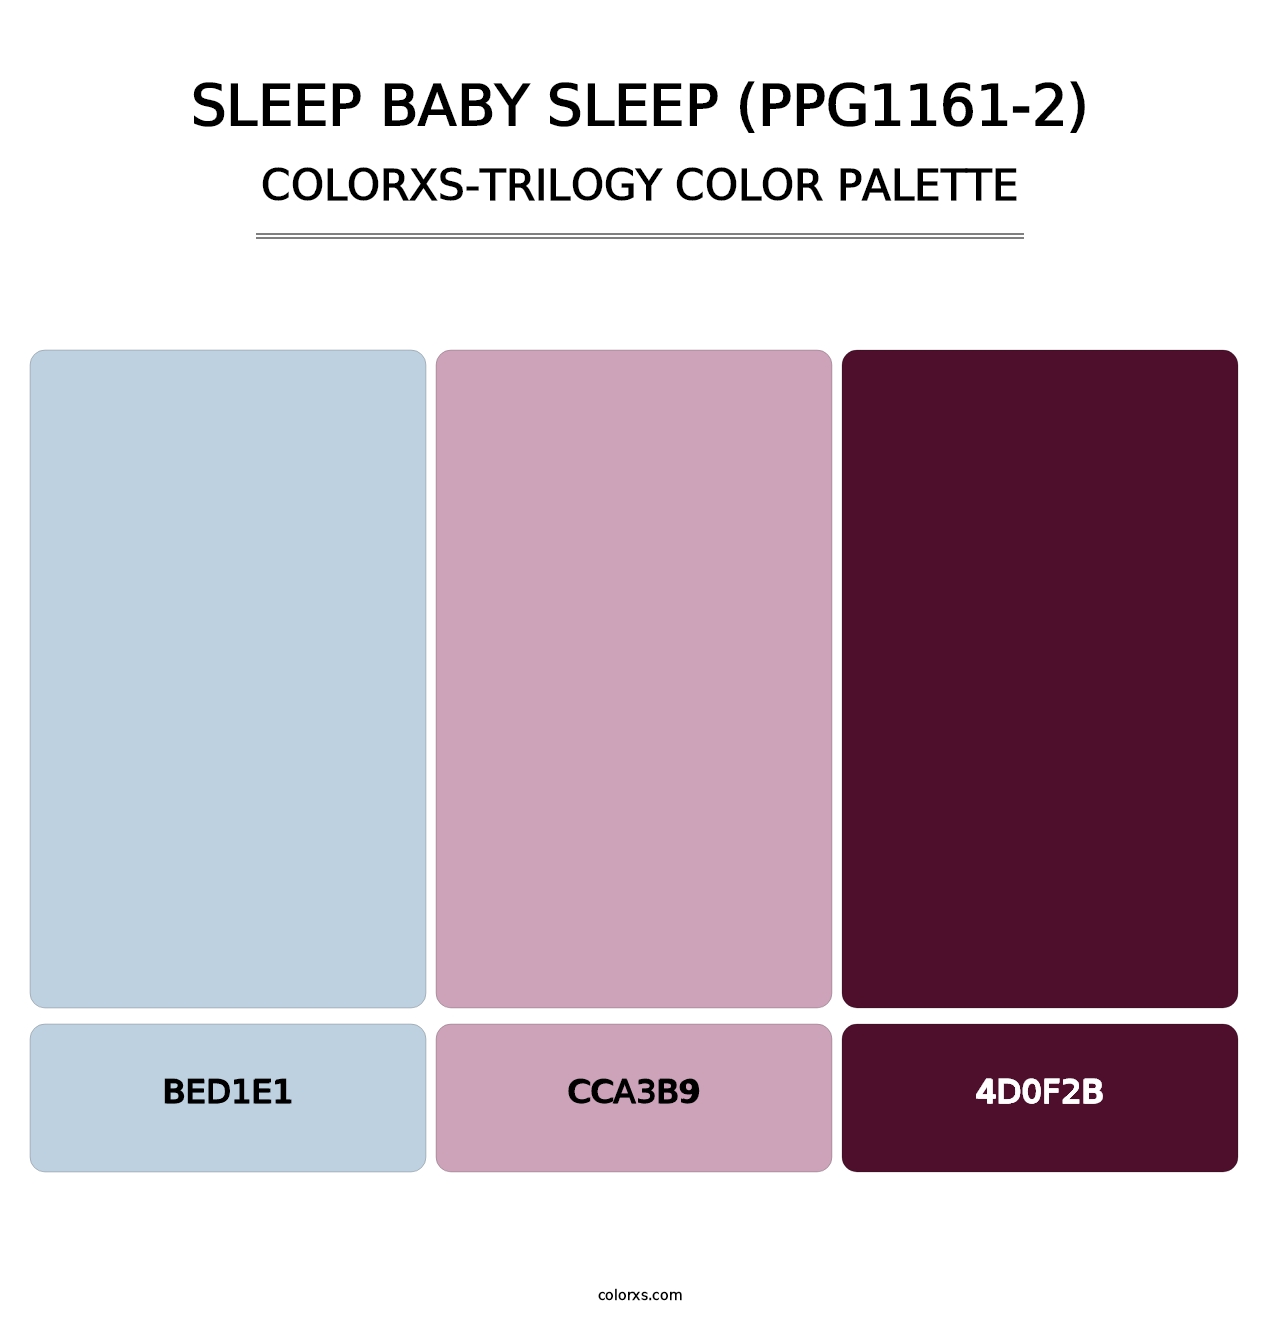 Sleep Baby Sleep (PPG1161-2) - Colorxs Trilogy Palette